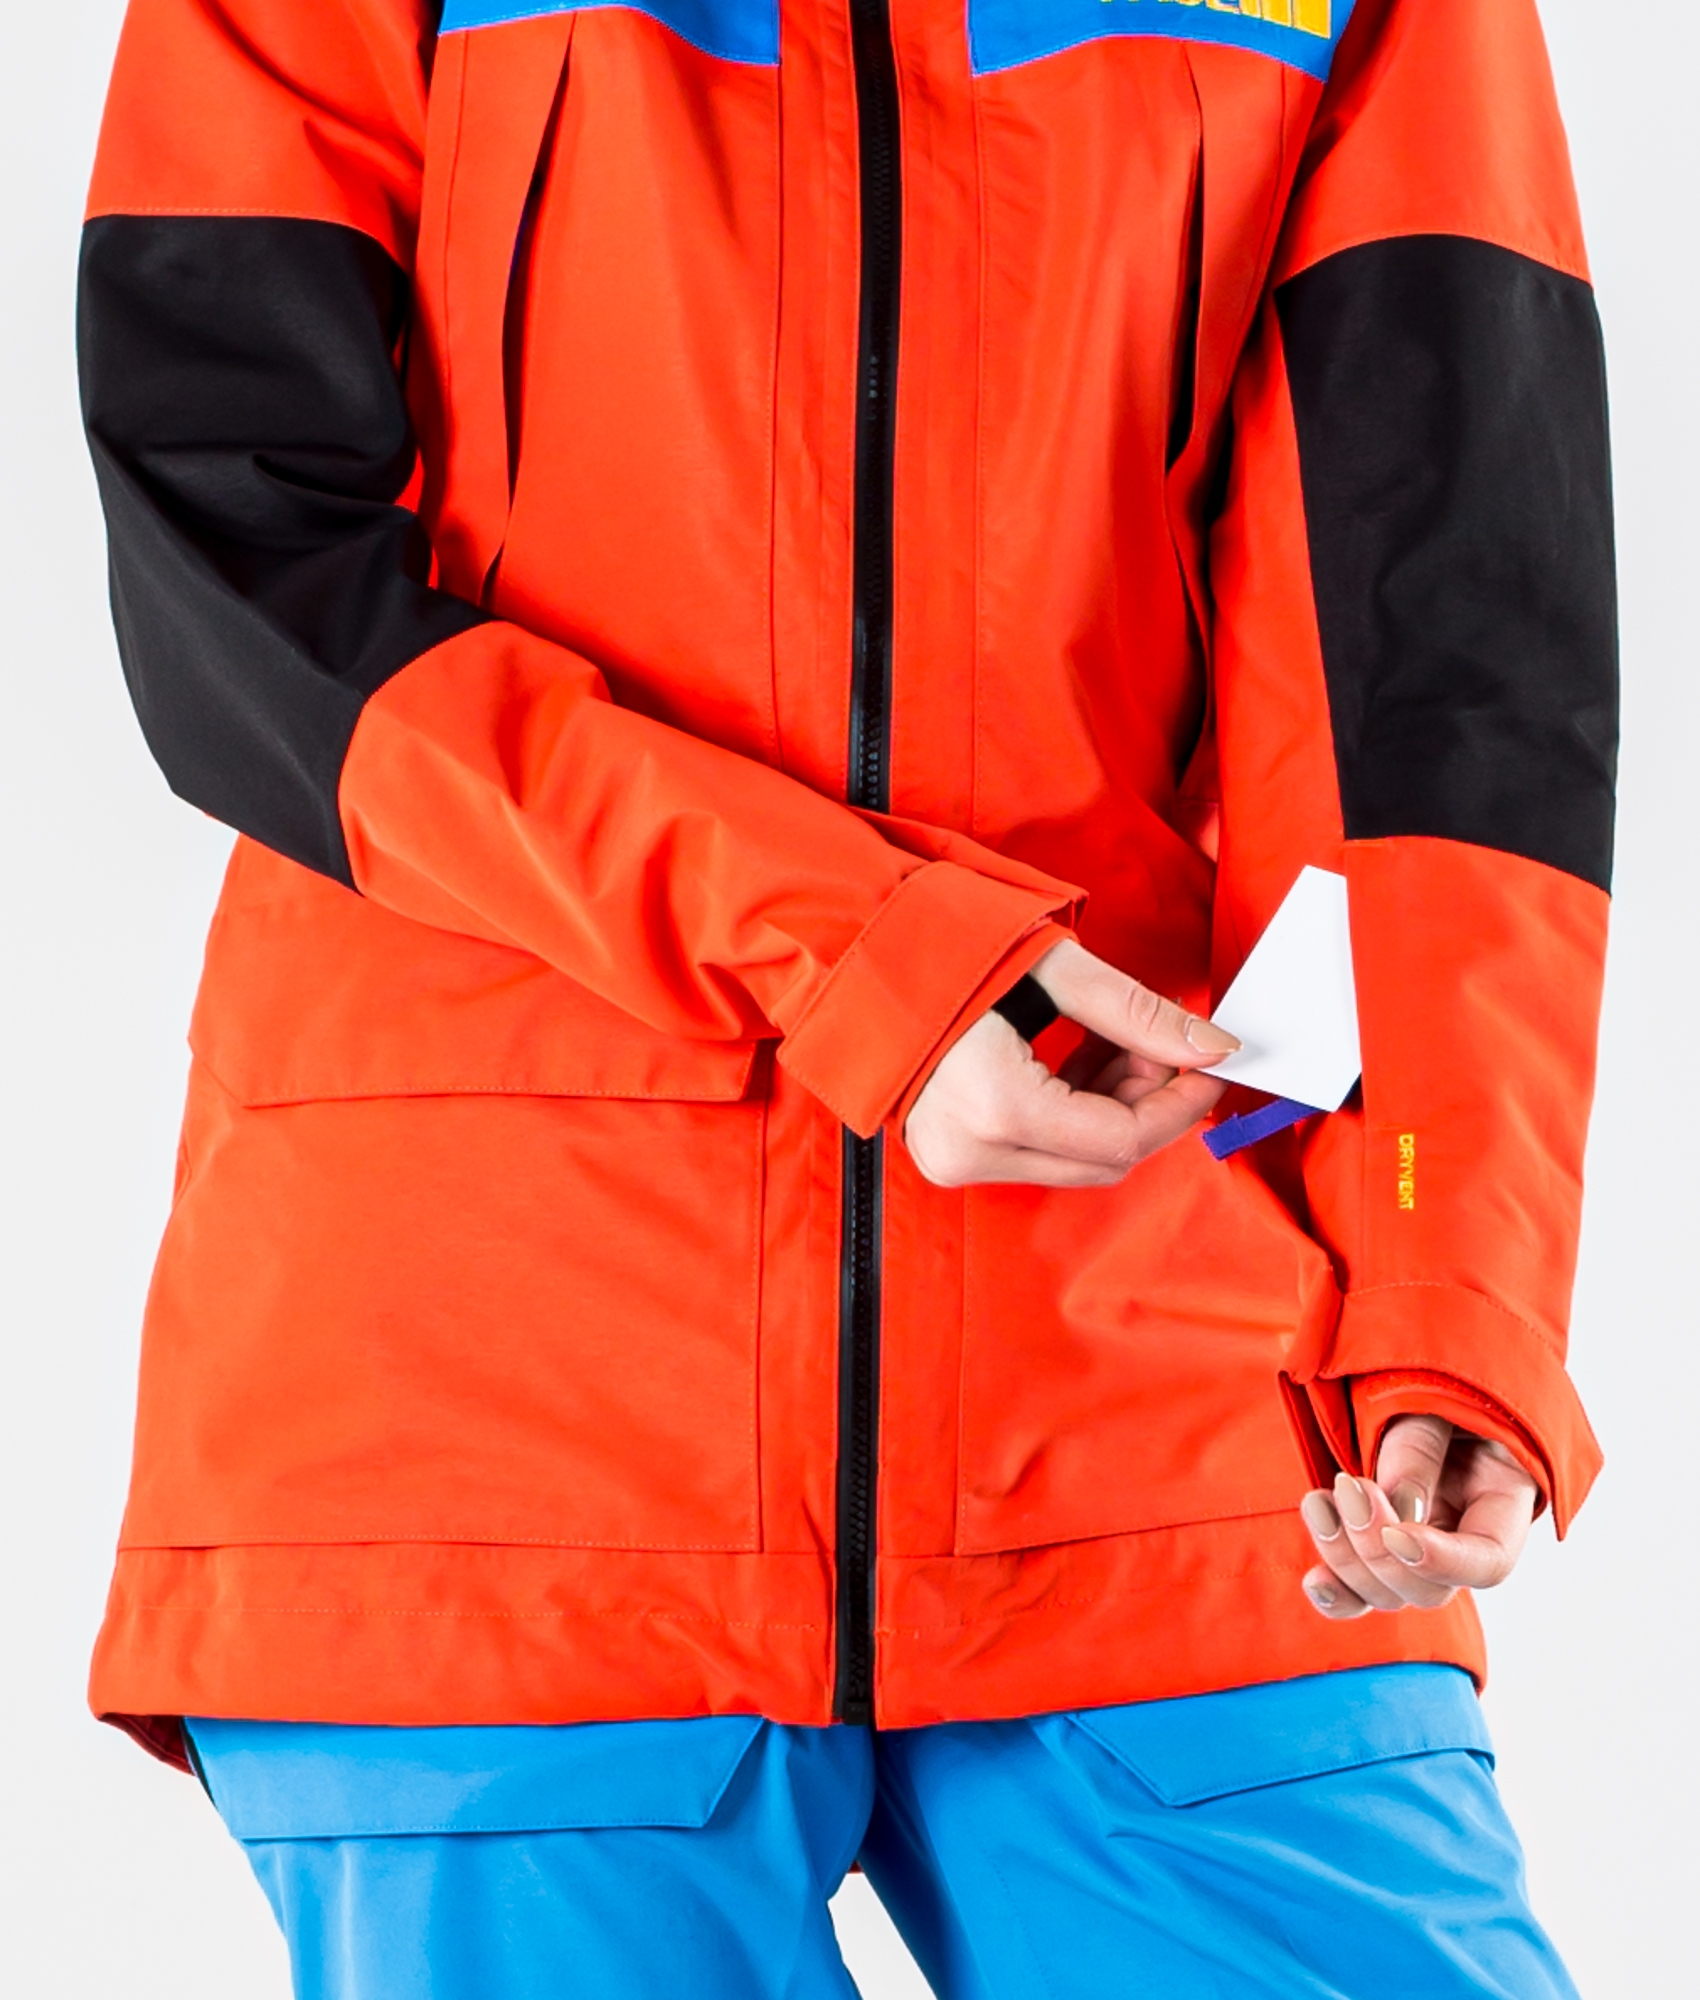 blue and red north face jacket